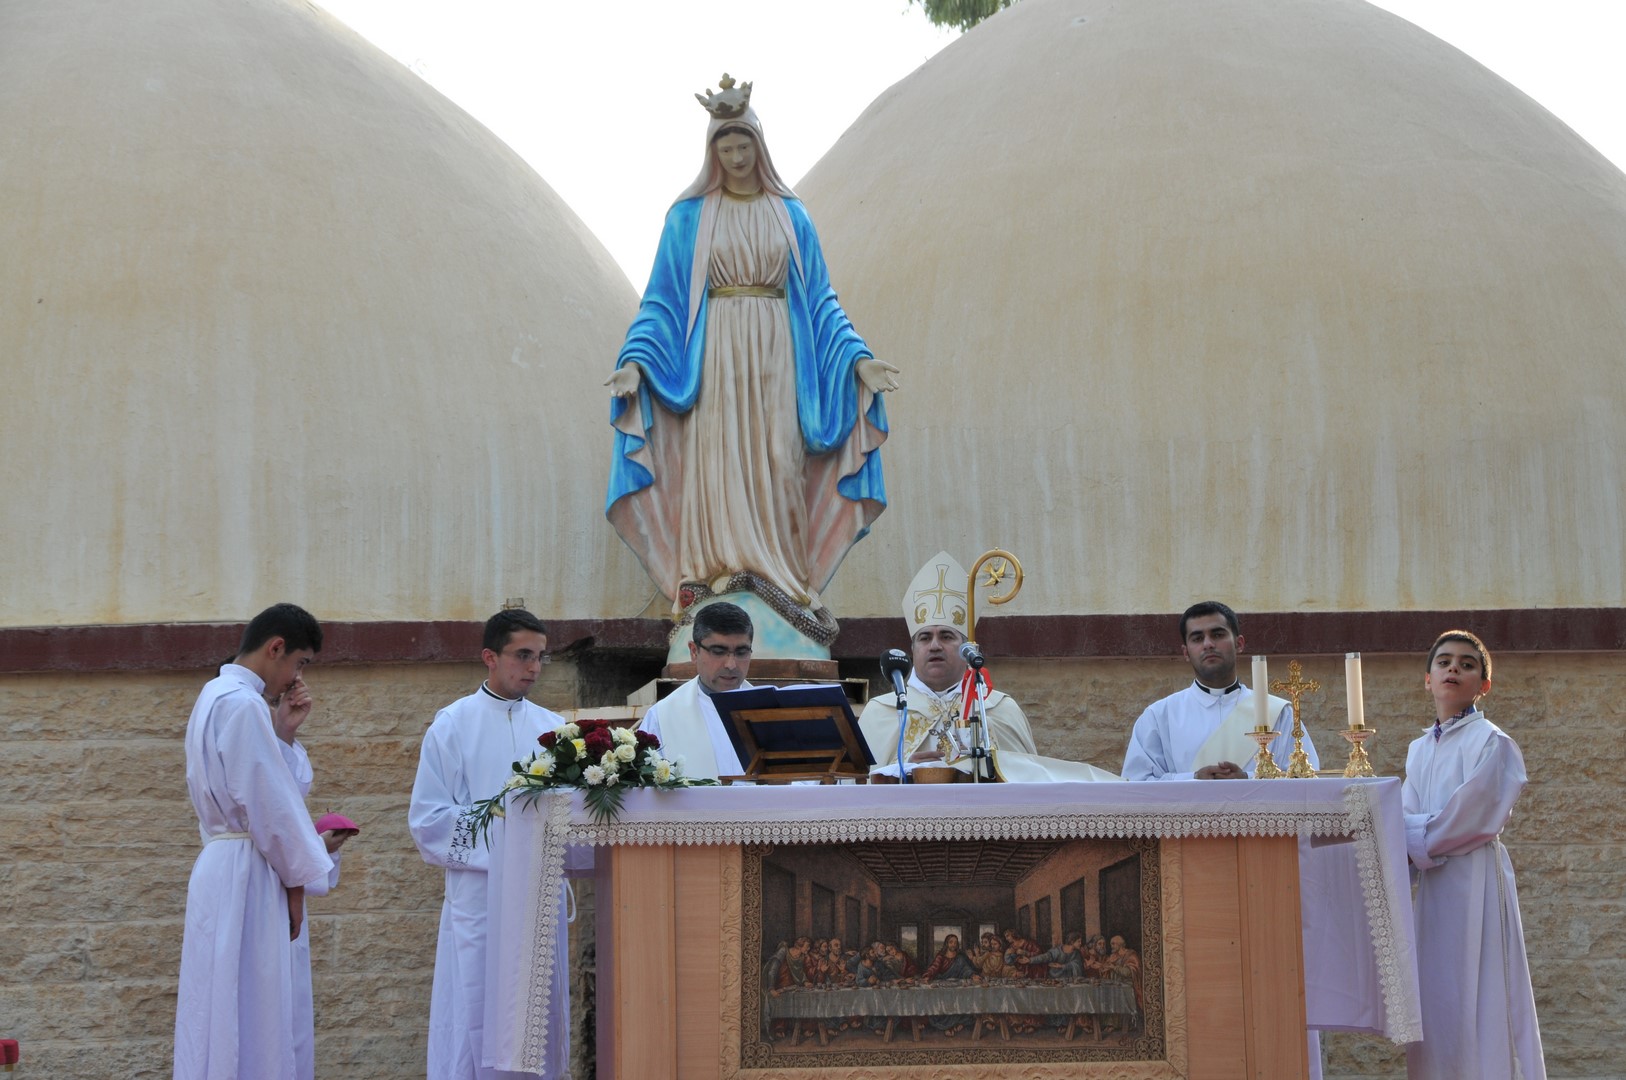 Feast of Our Lady Assumption of the Virgin Mary to Heaven at Mariamana Shrine